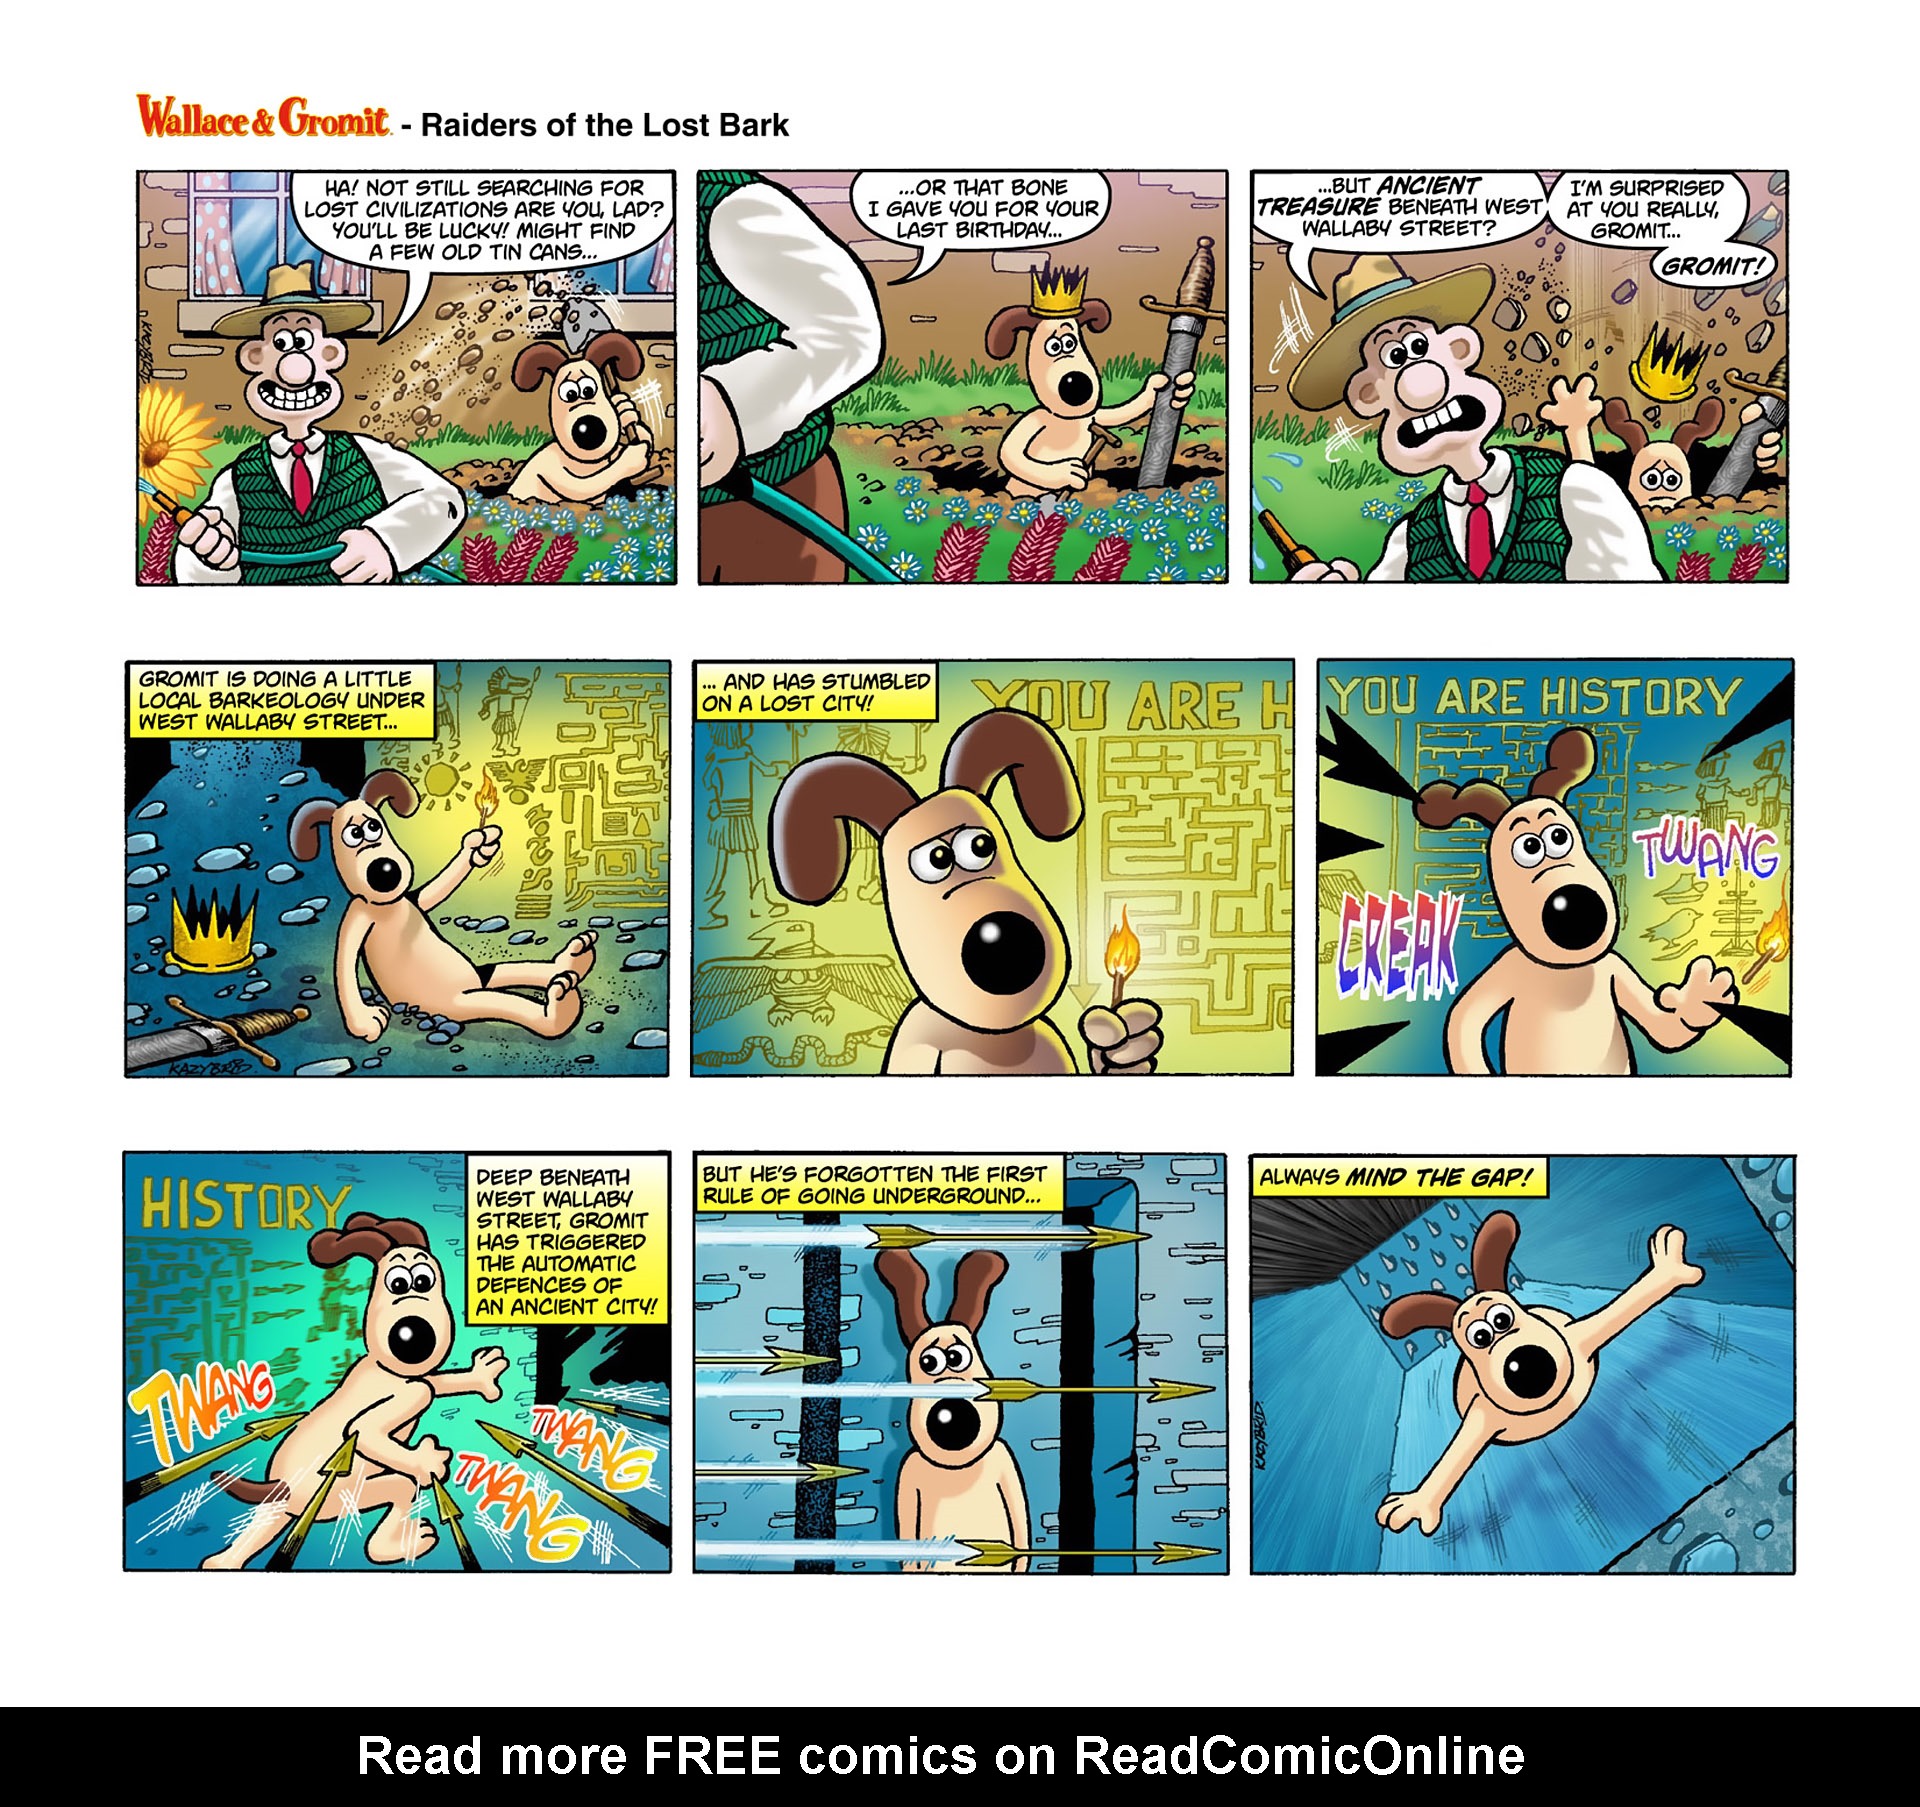 Read online Wallace & Gromit Dailies comic -  Issue #2 - 6